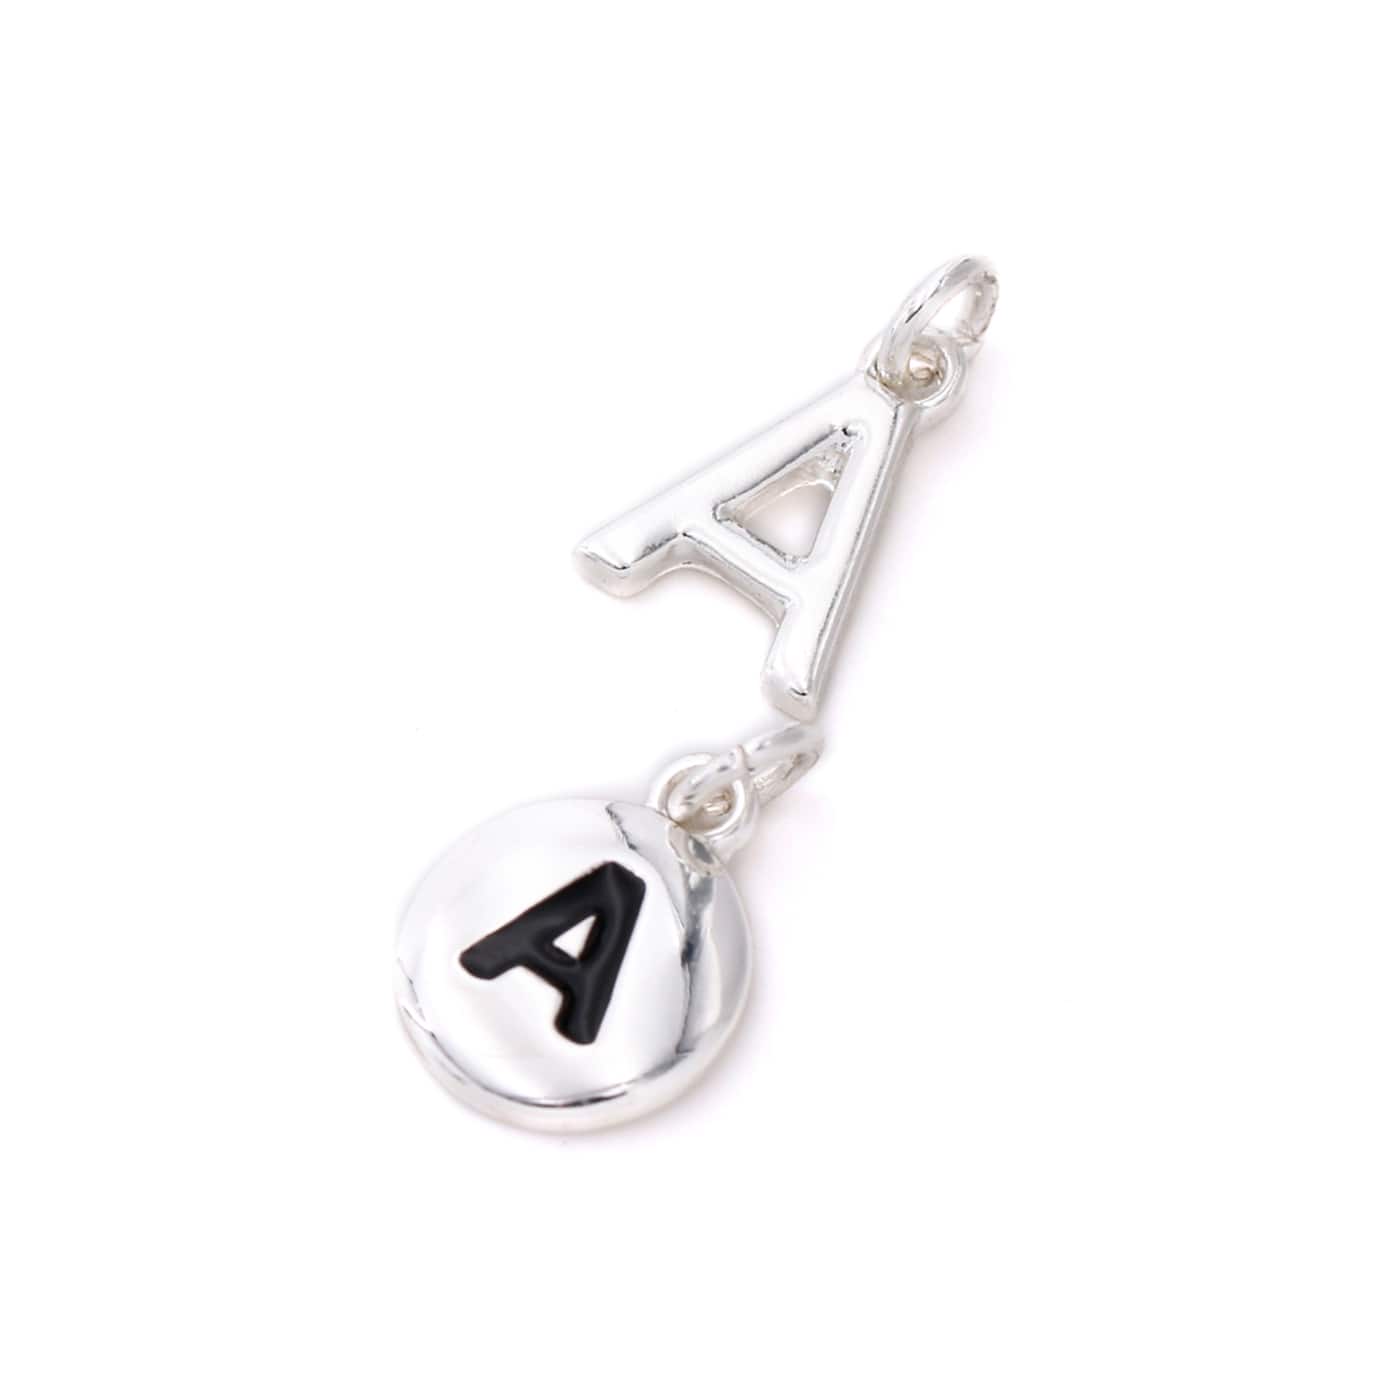 Charmalong™ Silver Plated Letter Charms by Bead Landing™